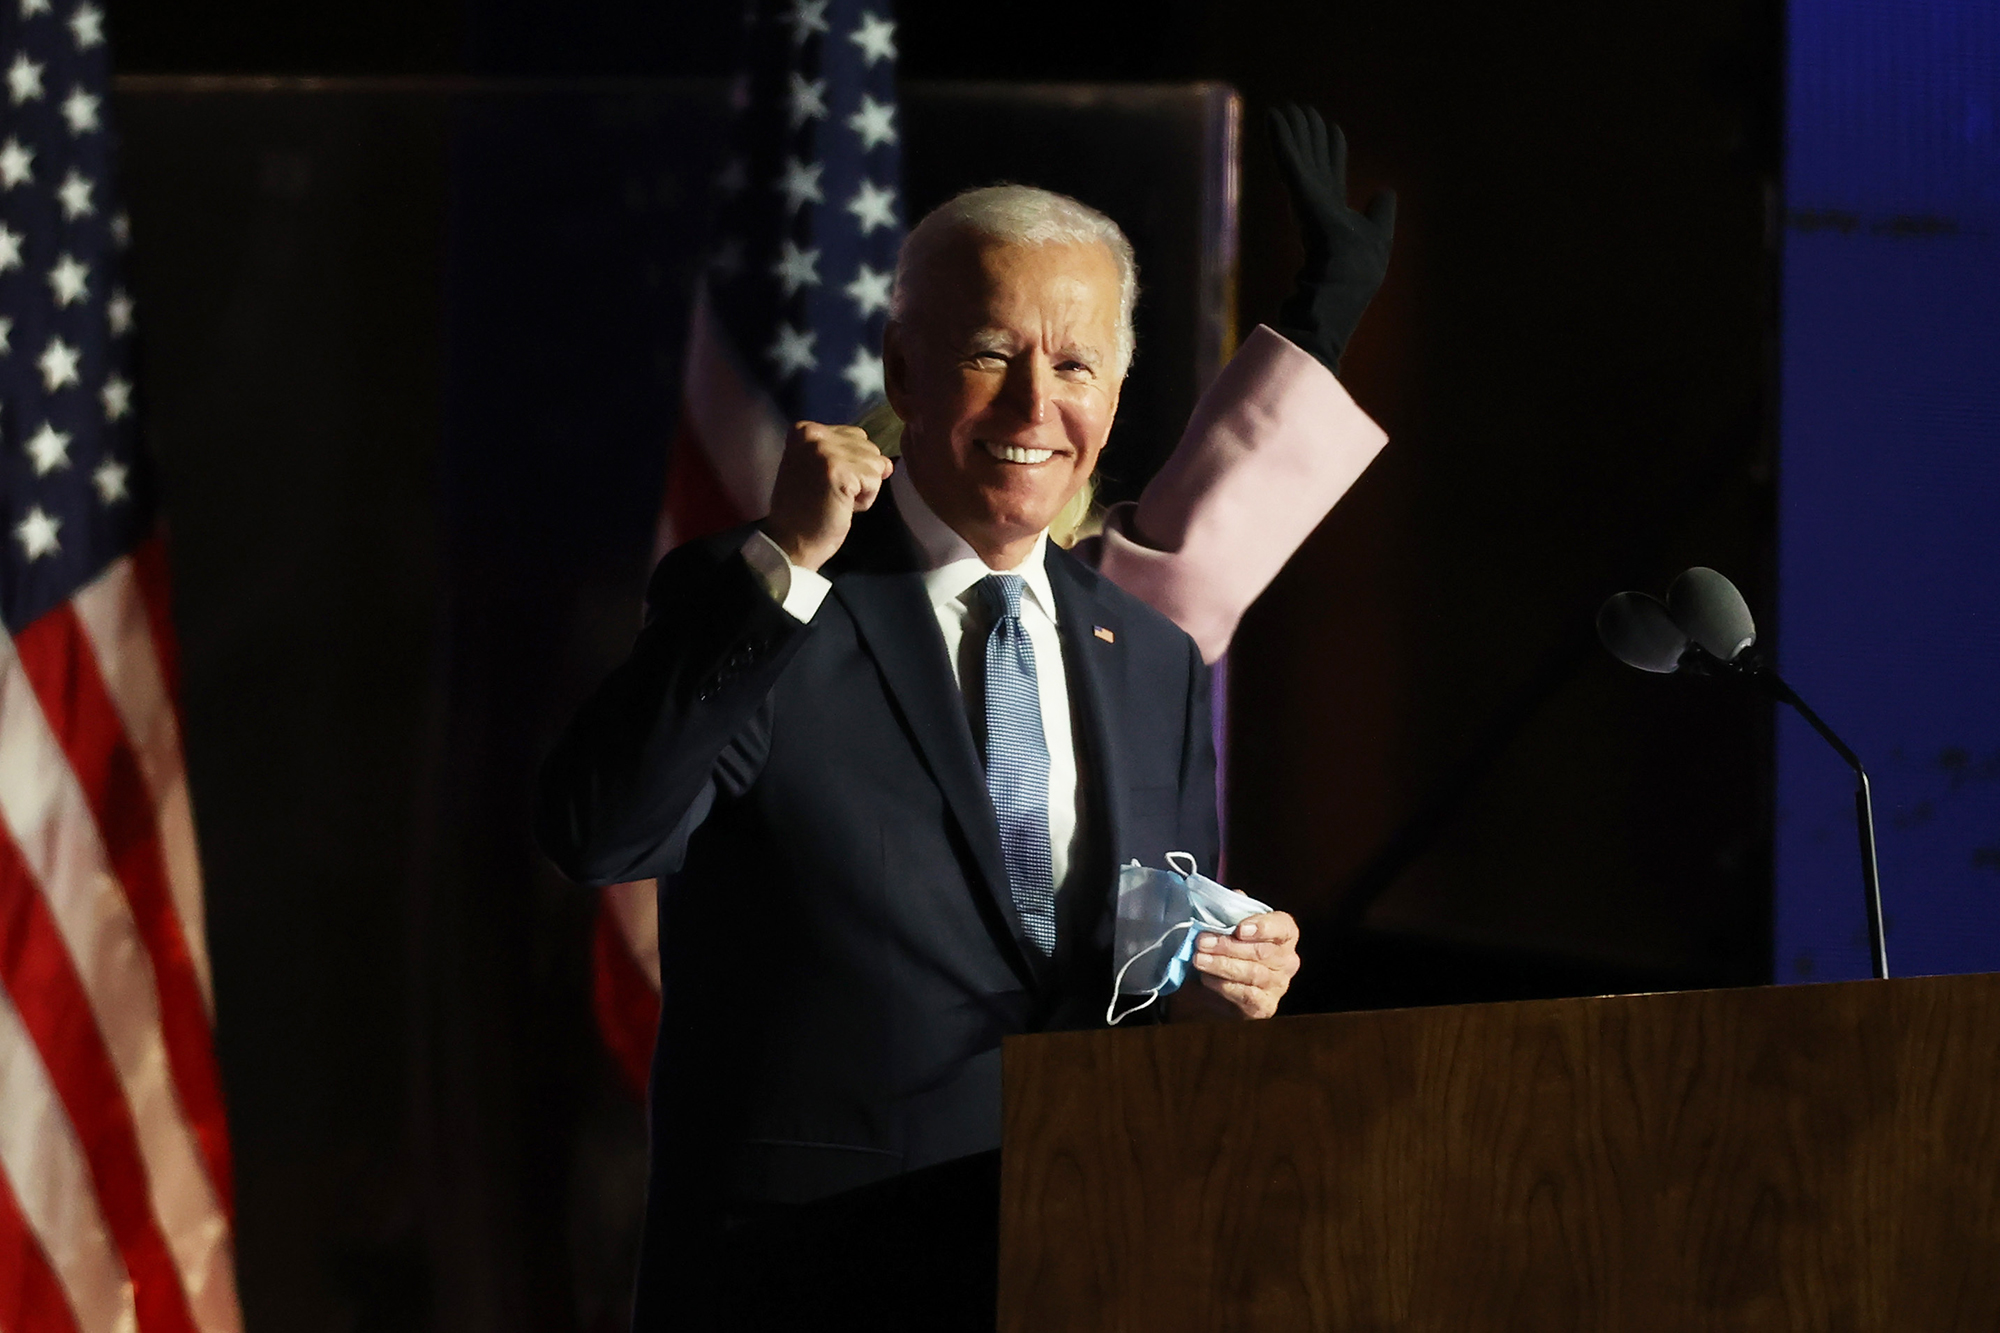 Democratic presidential nominee Joe Biden speaks at a drive-in election night event at the Chase Center in the early morning hours of Nov. 4, 2020 in Wilmington, Delaware. Biden put out a statement Saturday morning, saying he is “honored and humbled” by the trust Americans have placed with them. (Photo by Tasos Katopodis/Getty Images)
